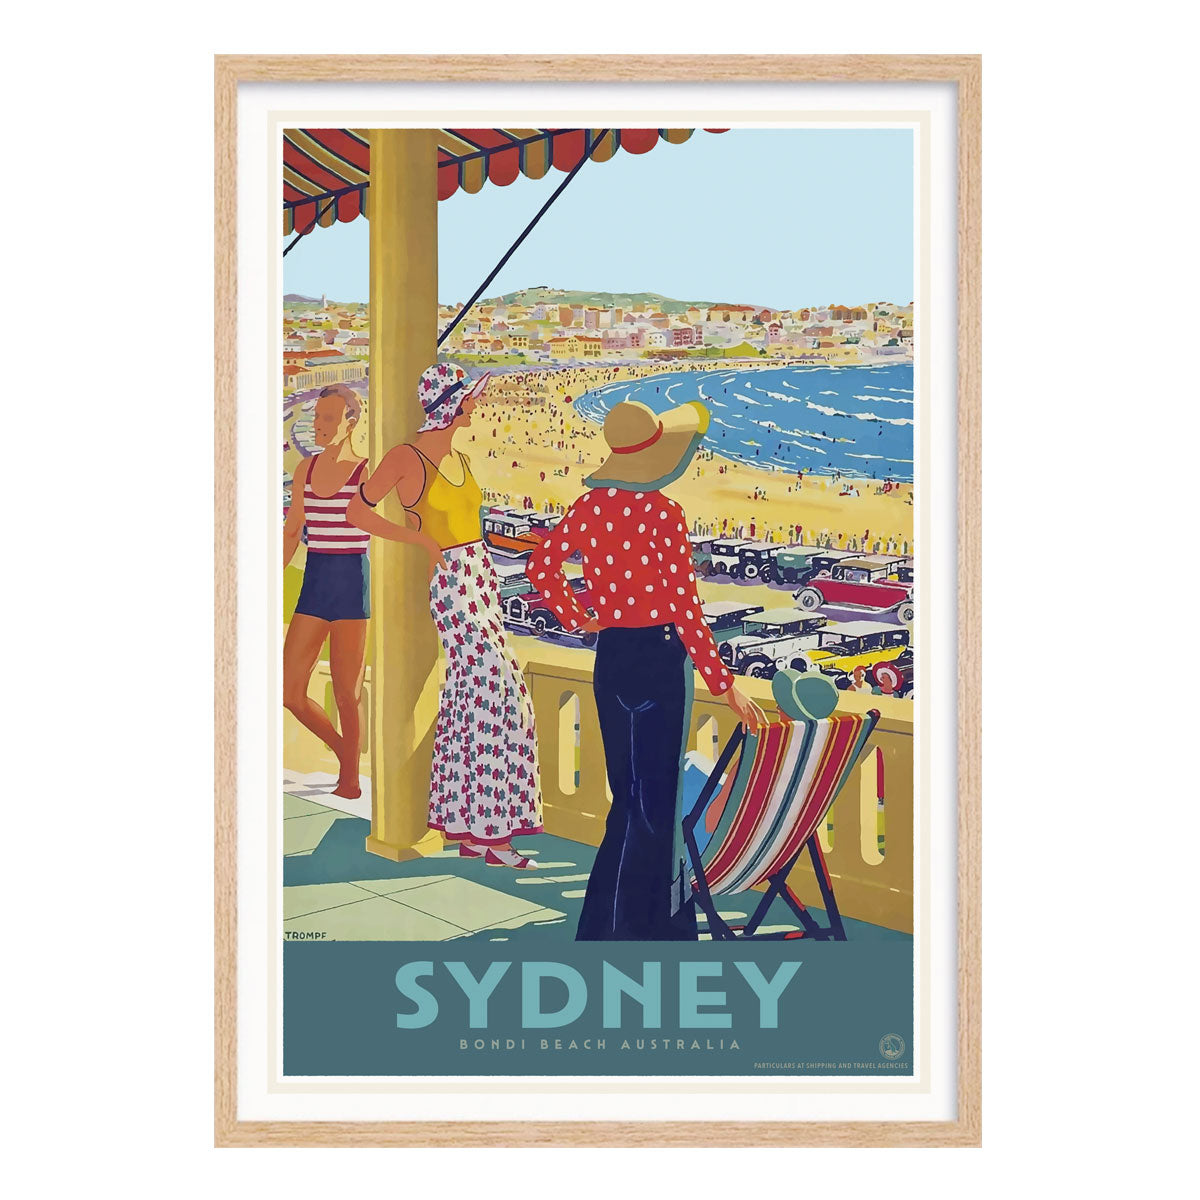 Sydney Australia vintage advertising poster in oak frame from PLaces We Luv